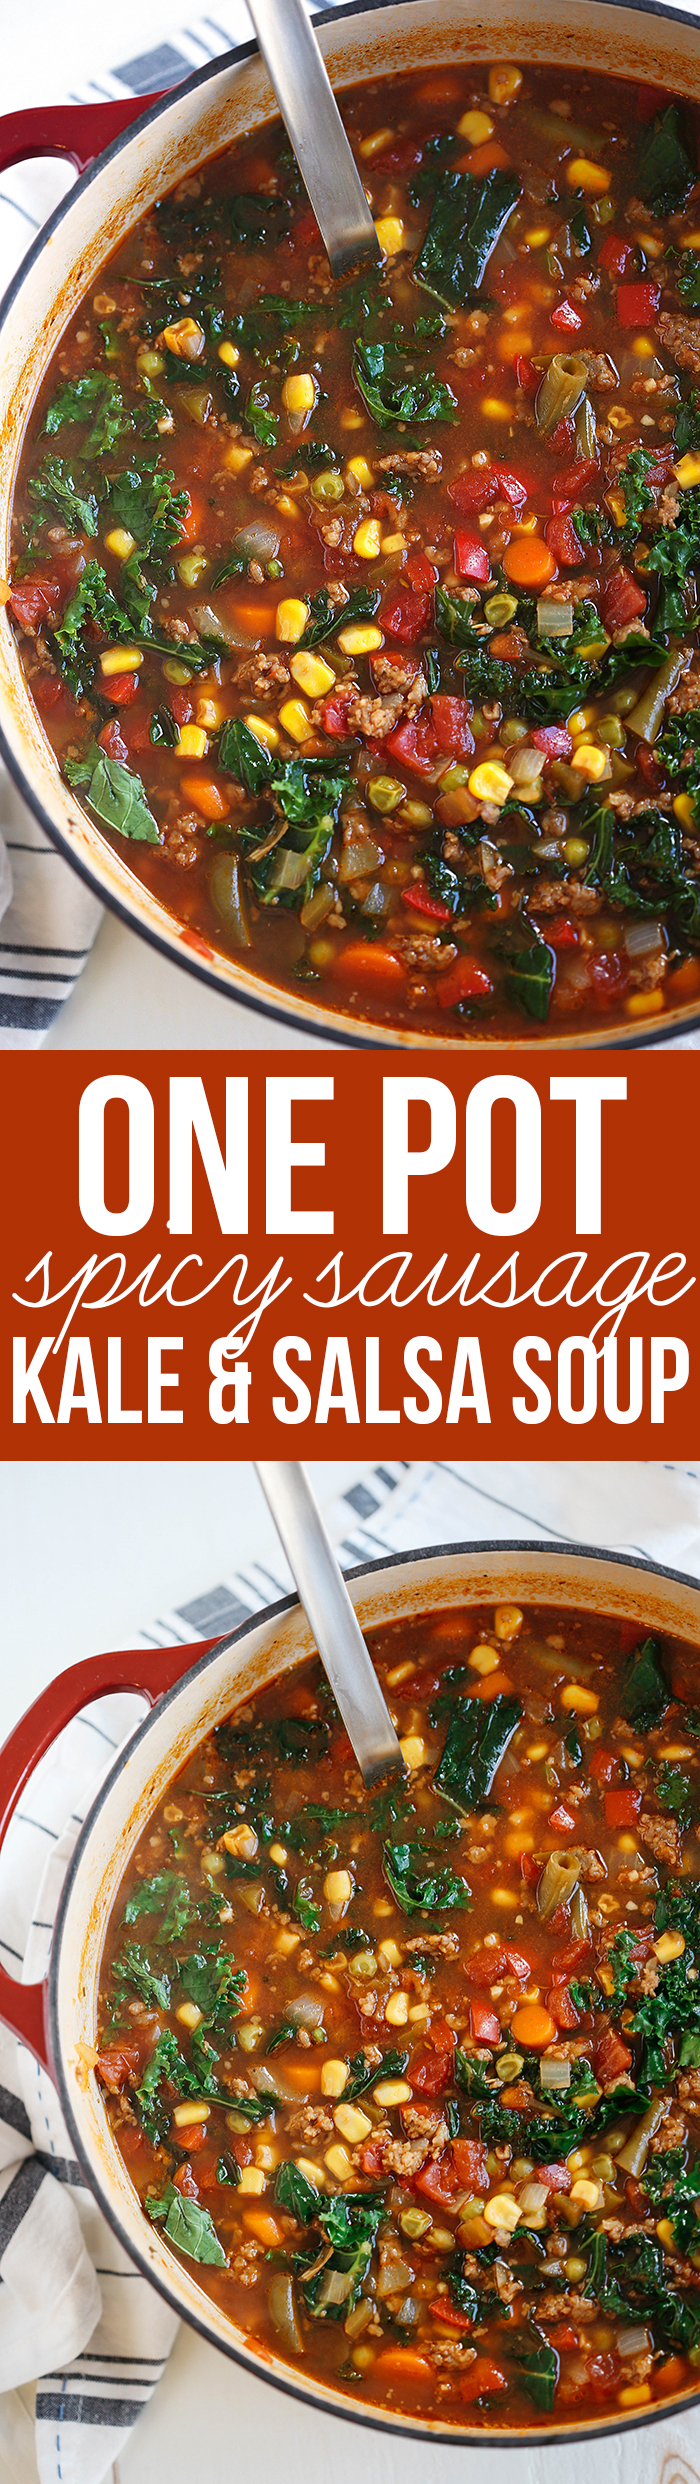 This One Pot Spicy Sausage and Kale Soup is hearty, delicious and literally takes just 5 minutes to throw together in a pot or slow cooker!